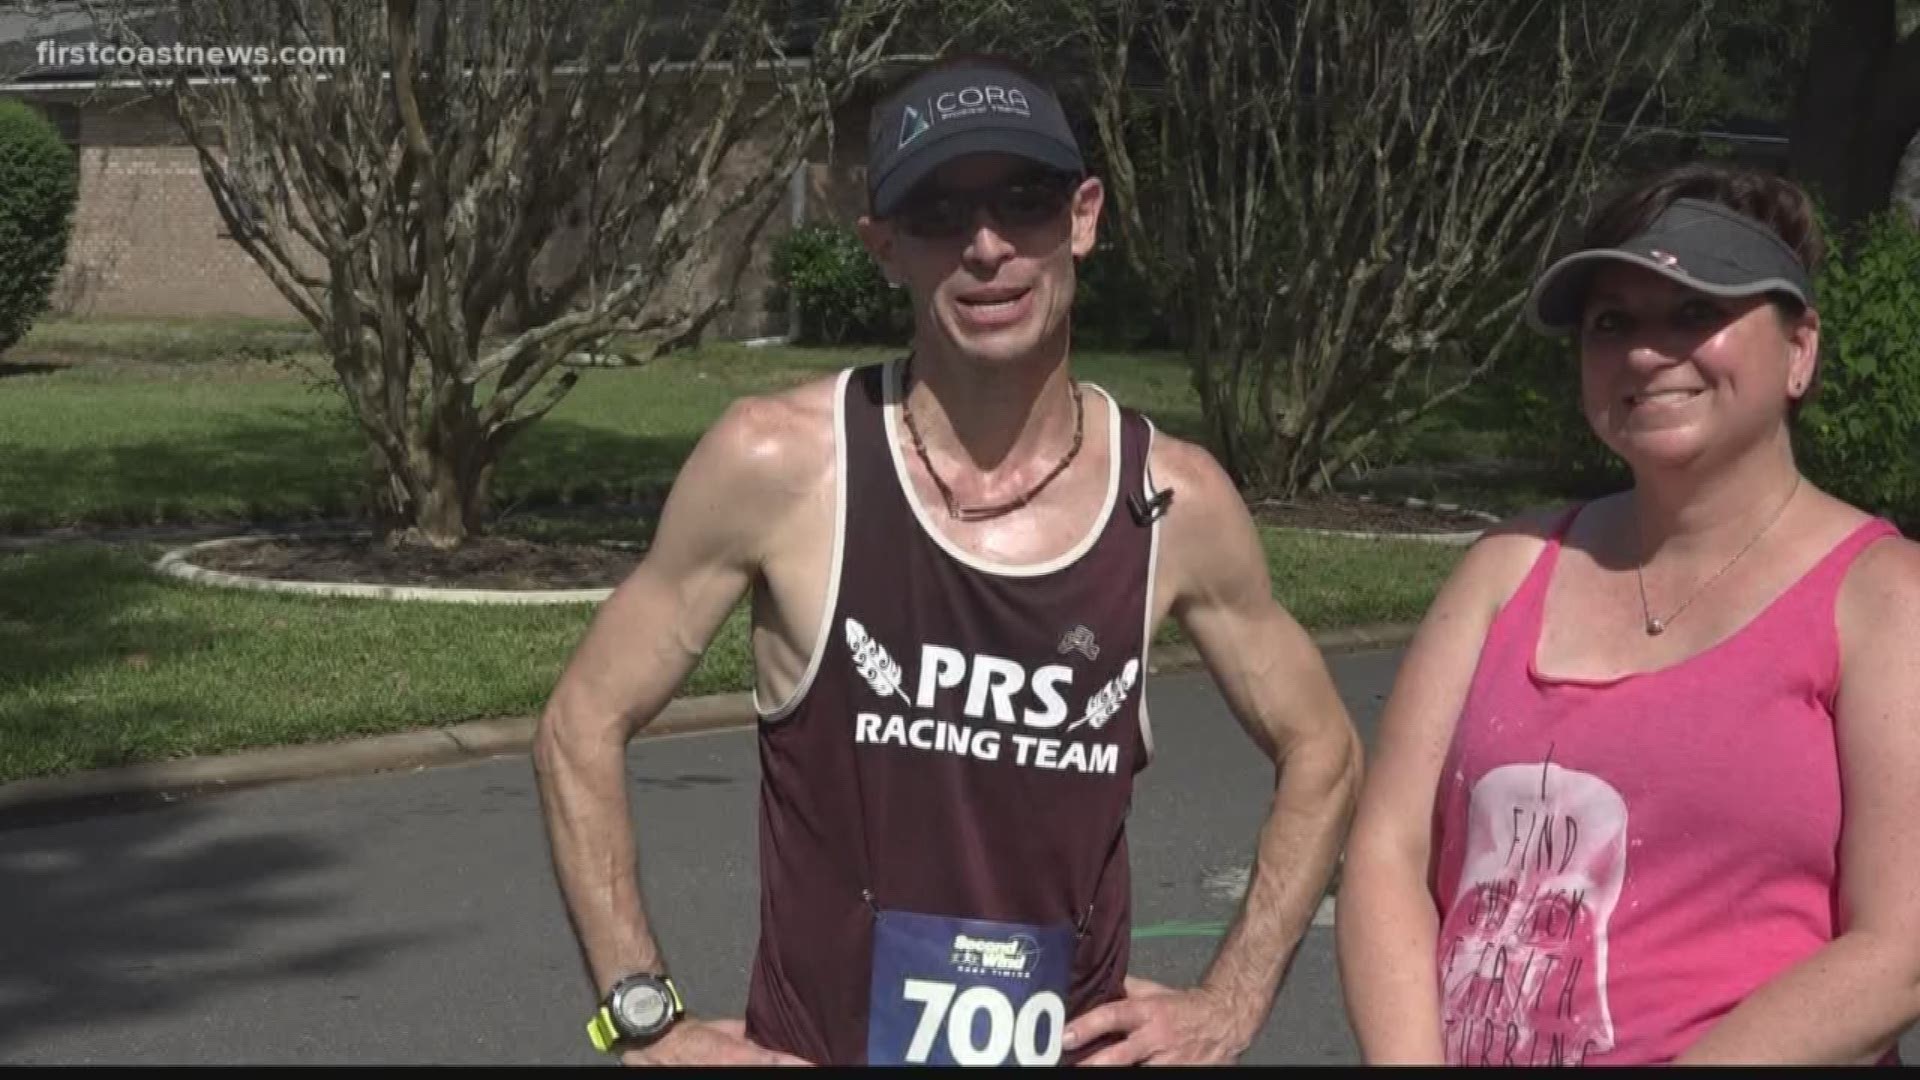 A local husband is running 312 miles in three days to raise money to help women fight breast cancer.